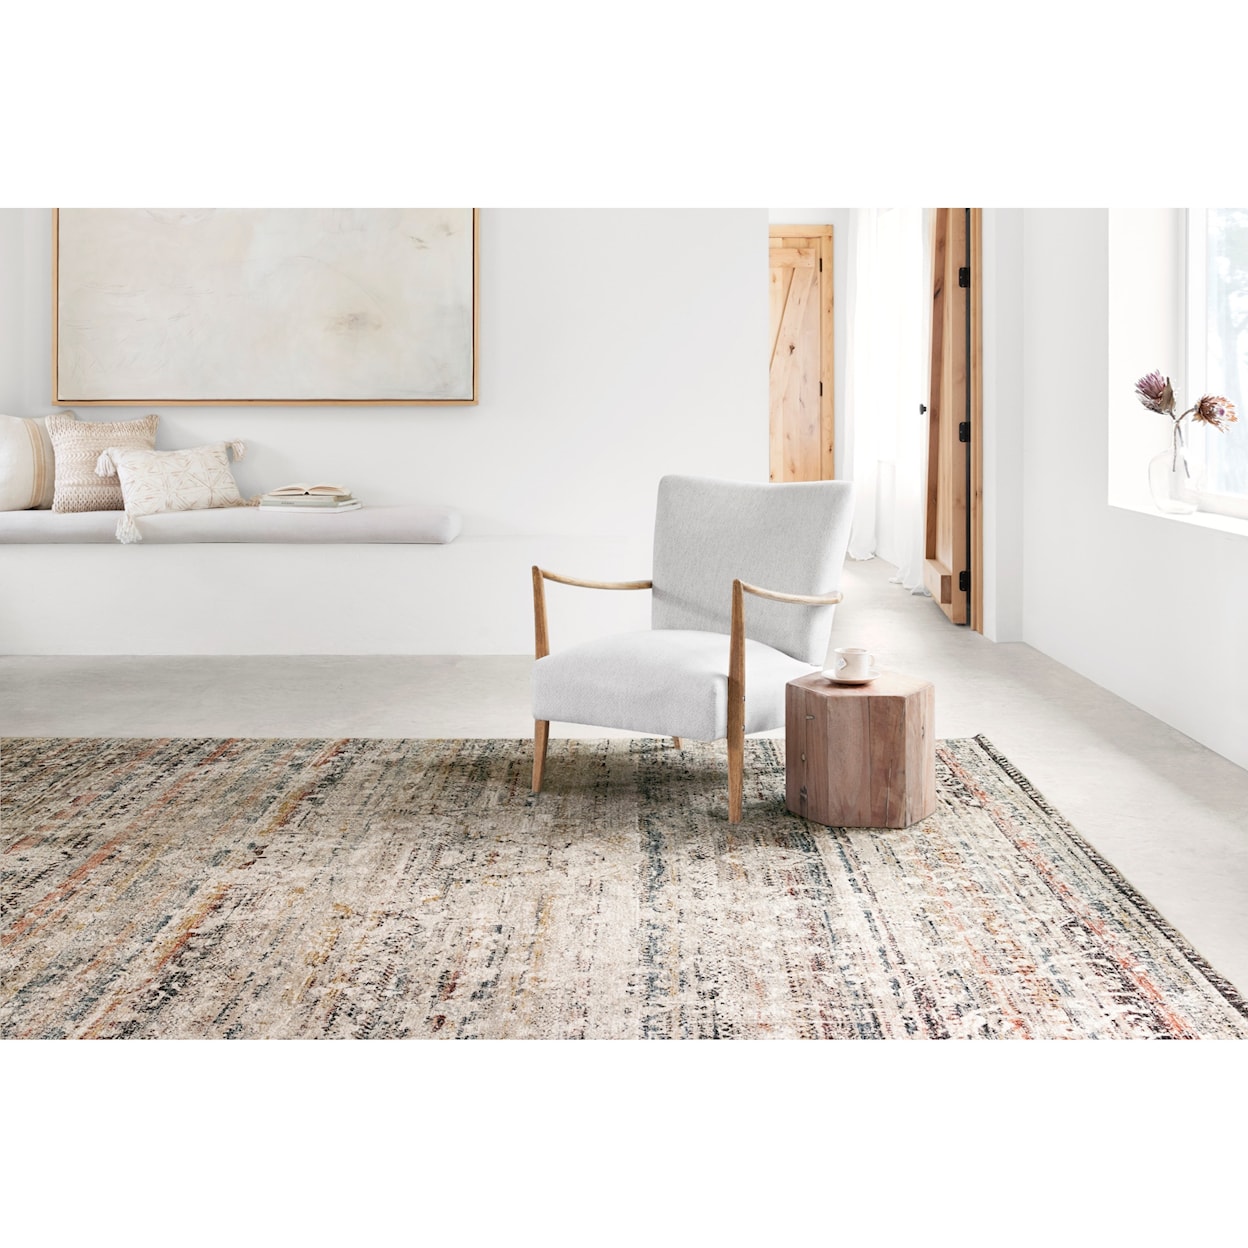 Reeds Rugs Theia 11'6" x 16' Taupe / Multi Rug